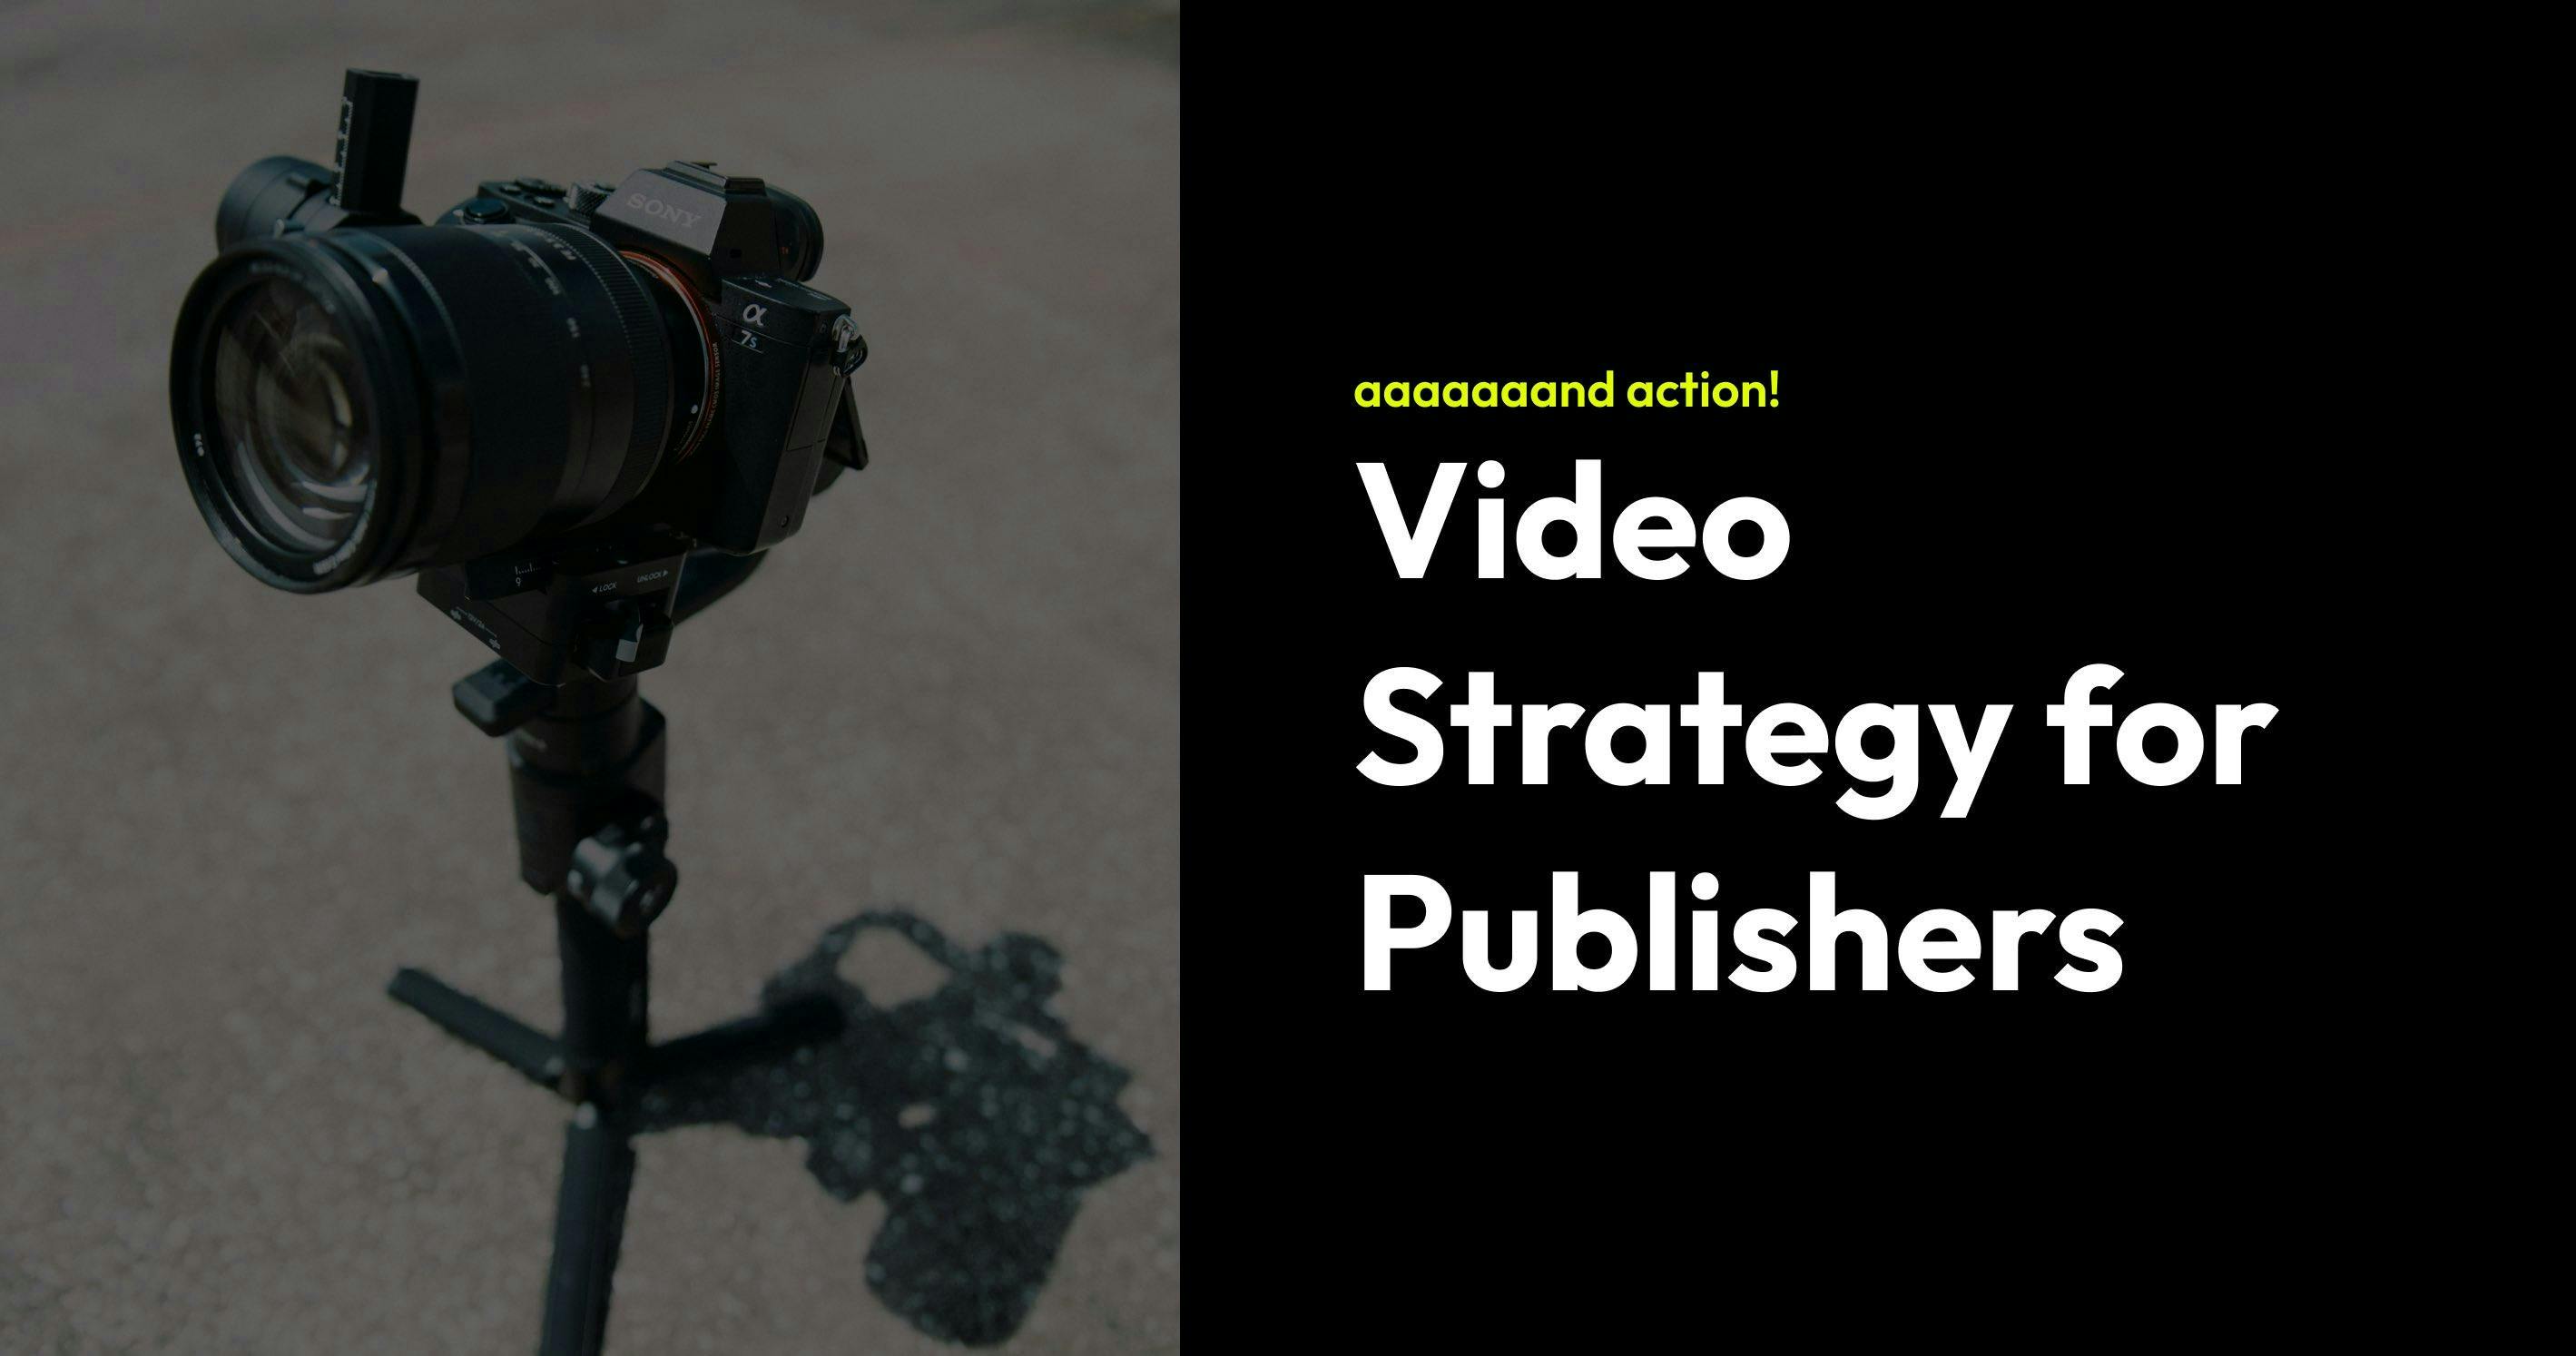 An image for a blog post titled Publisher Video Strategy: "aaaand action!"